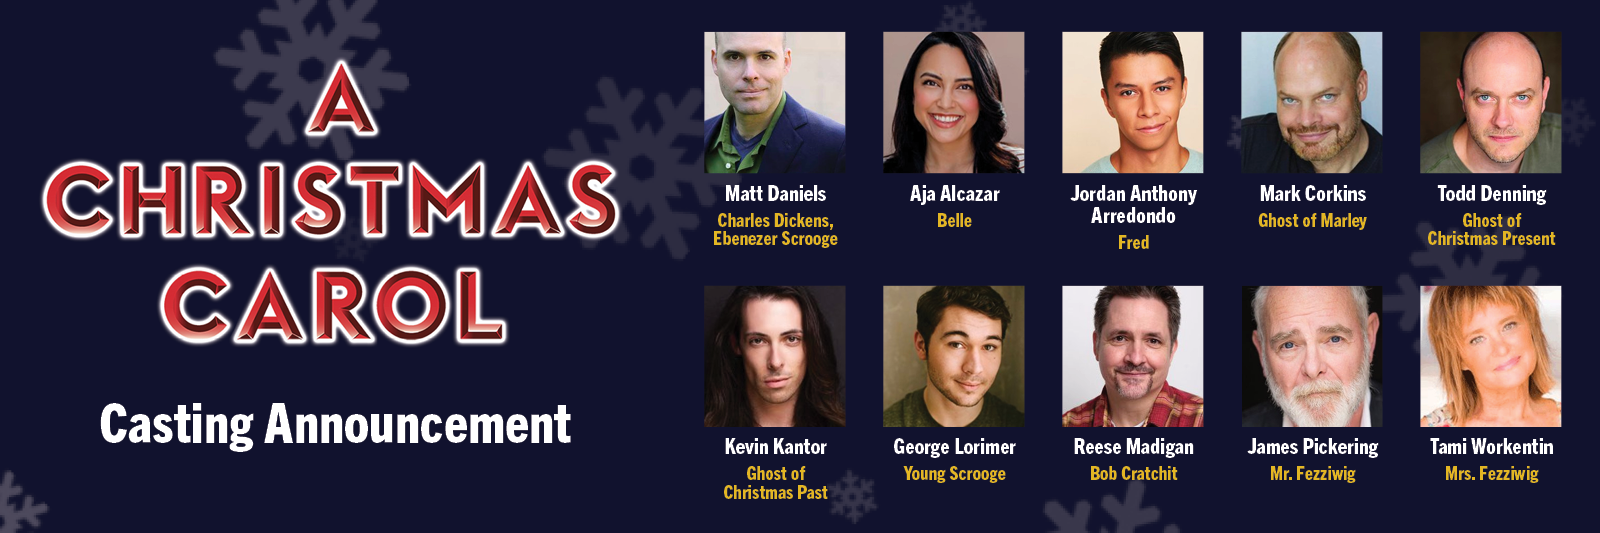 Celebrate Christmas in July and Save 25% to Milwaukee Repertory Theater’s A Christmas Carol on Thursday, July 25